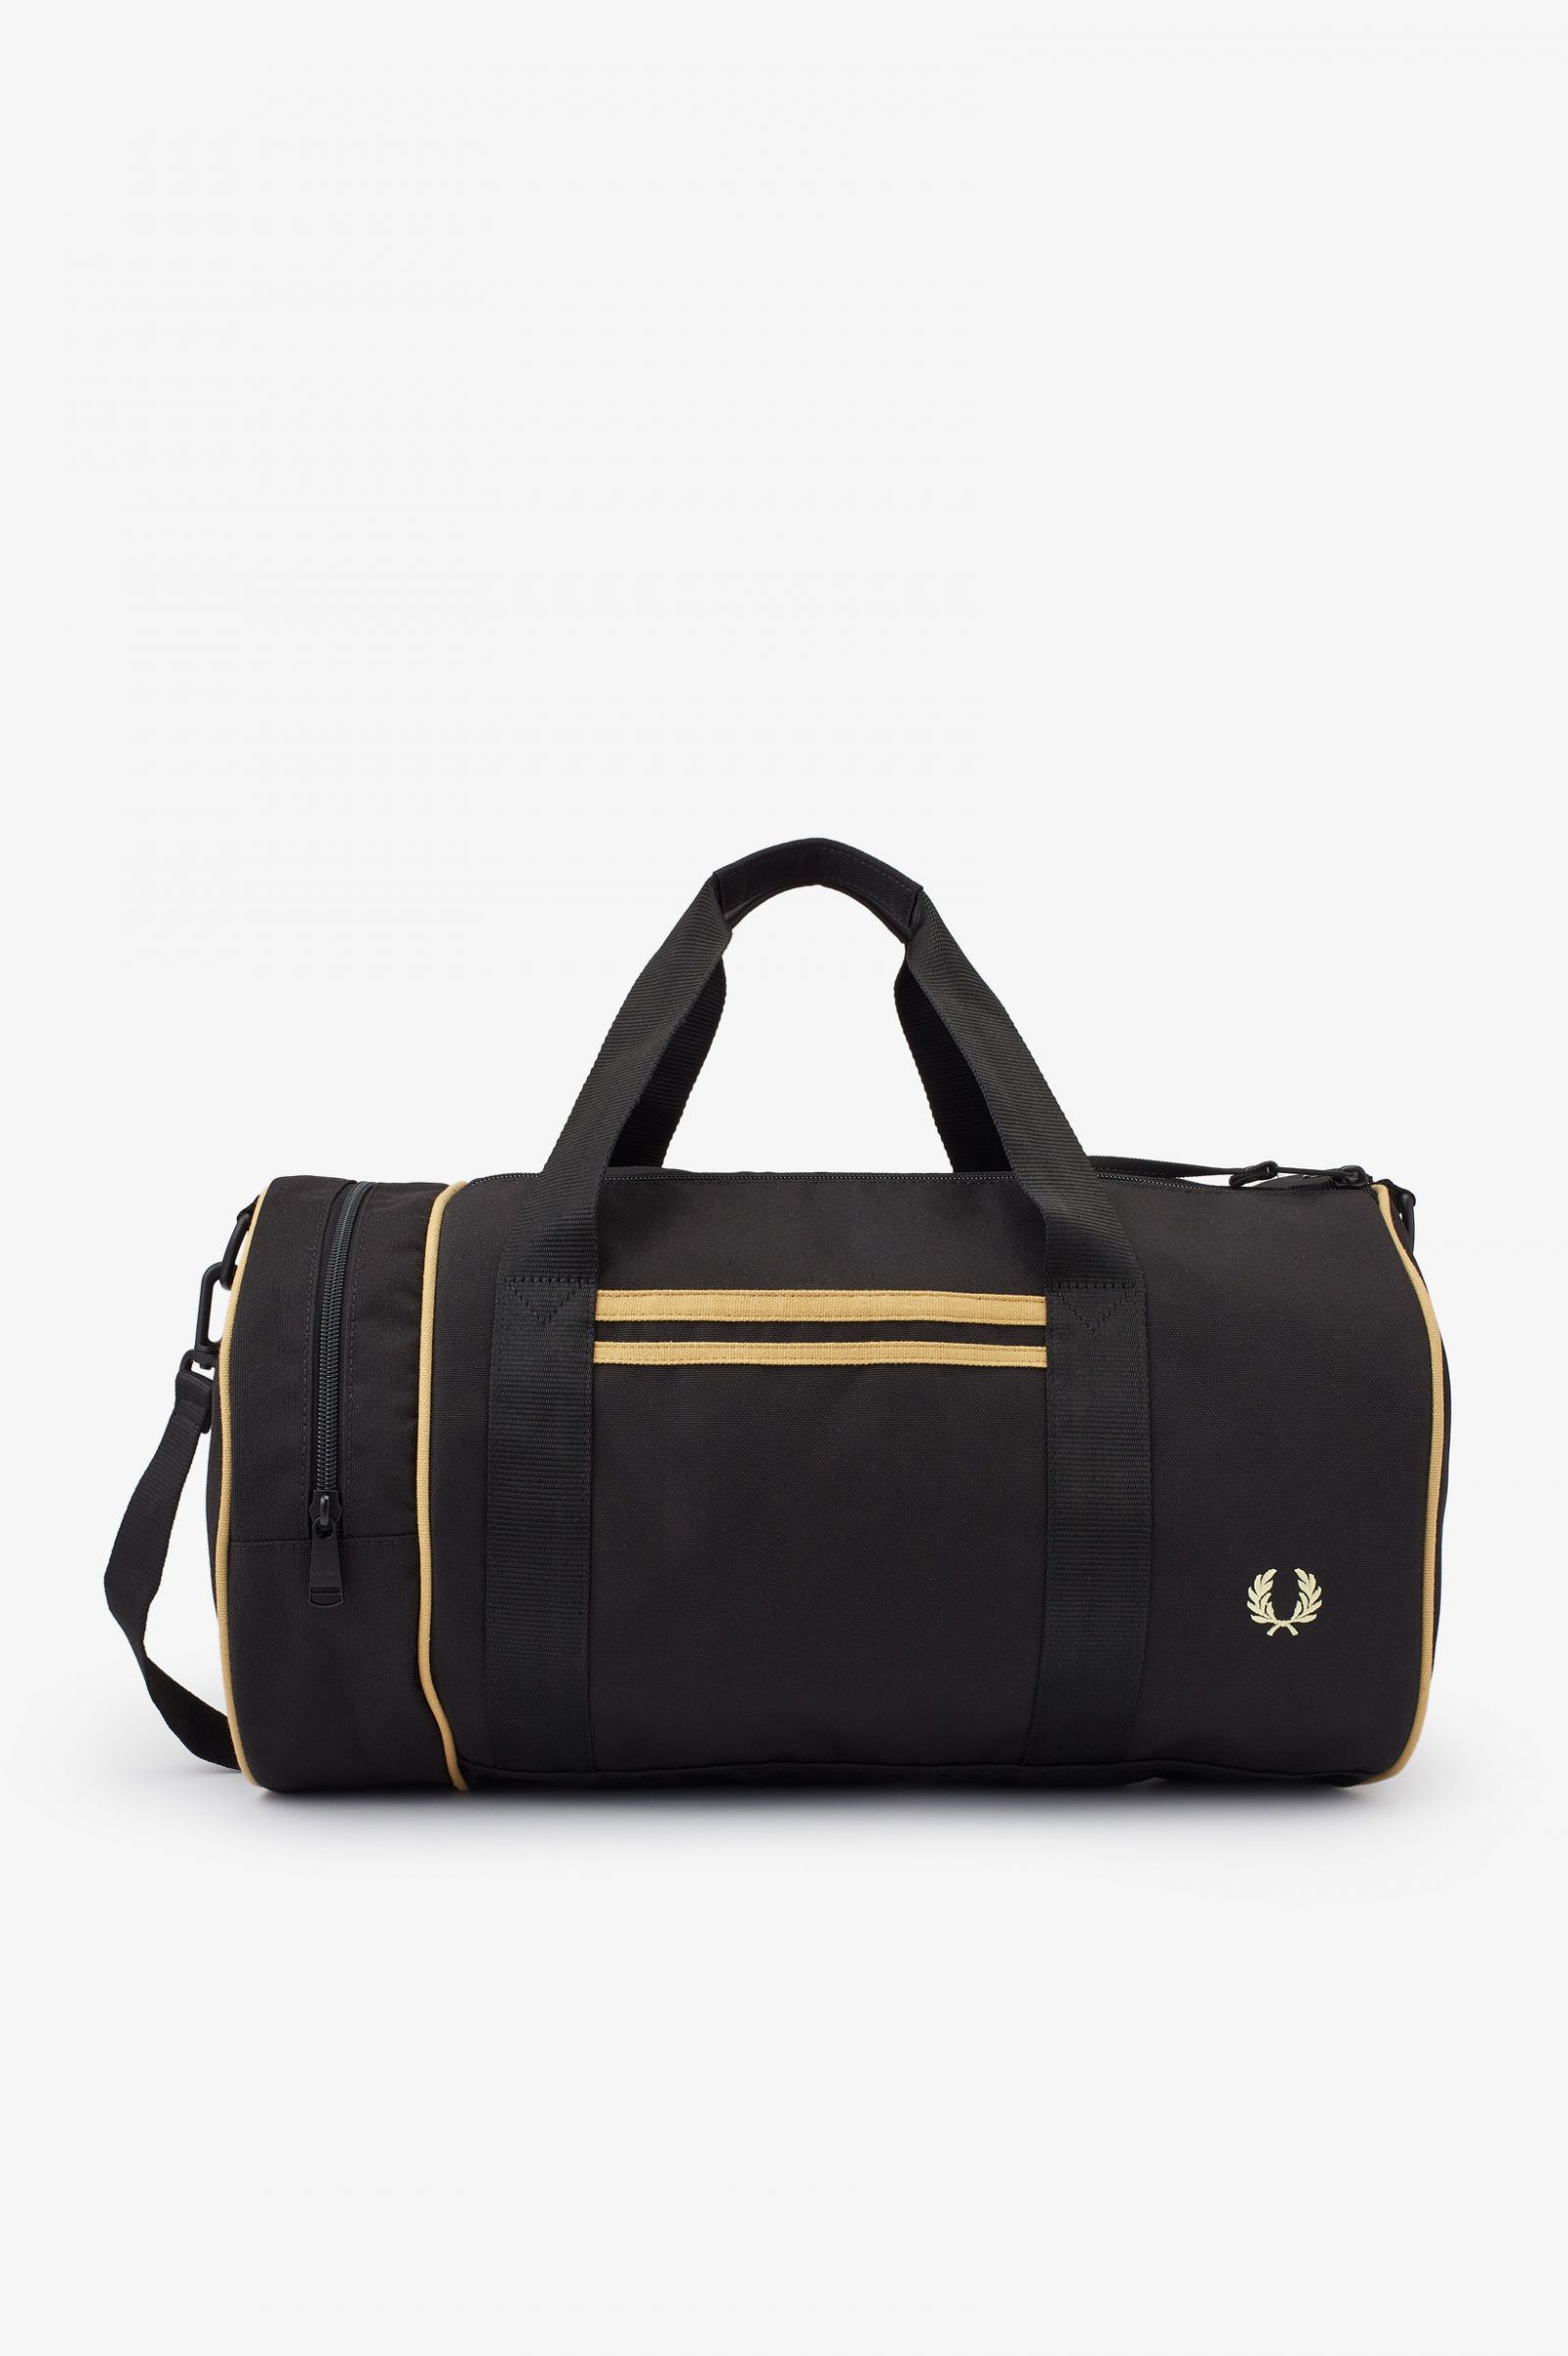 fred perry twin tipped cross body bag